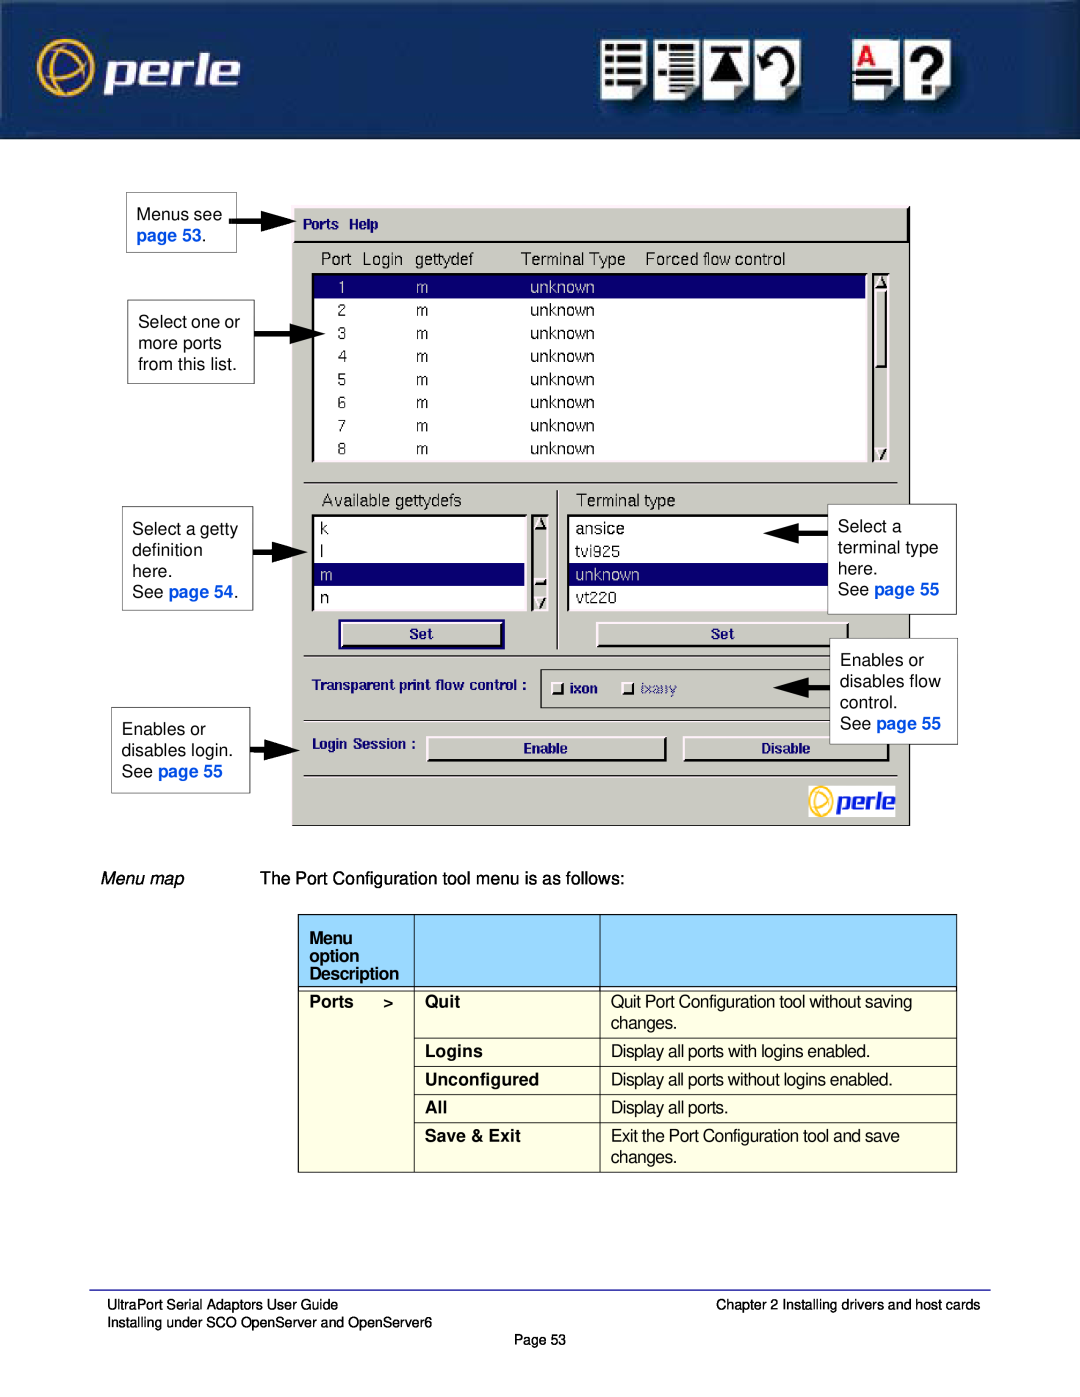 Perle Systems 5500152-23 See page, Menu map, The Port Configuration tool menu is as follows, option, Description, Quit 